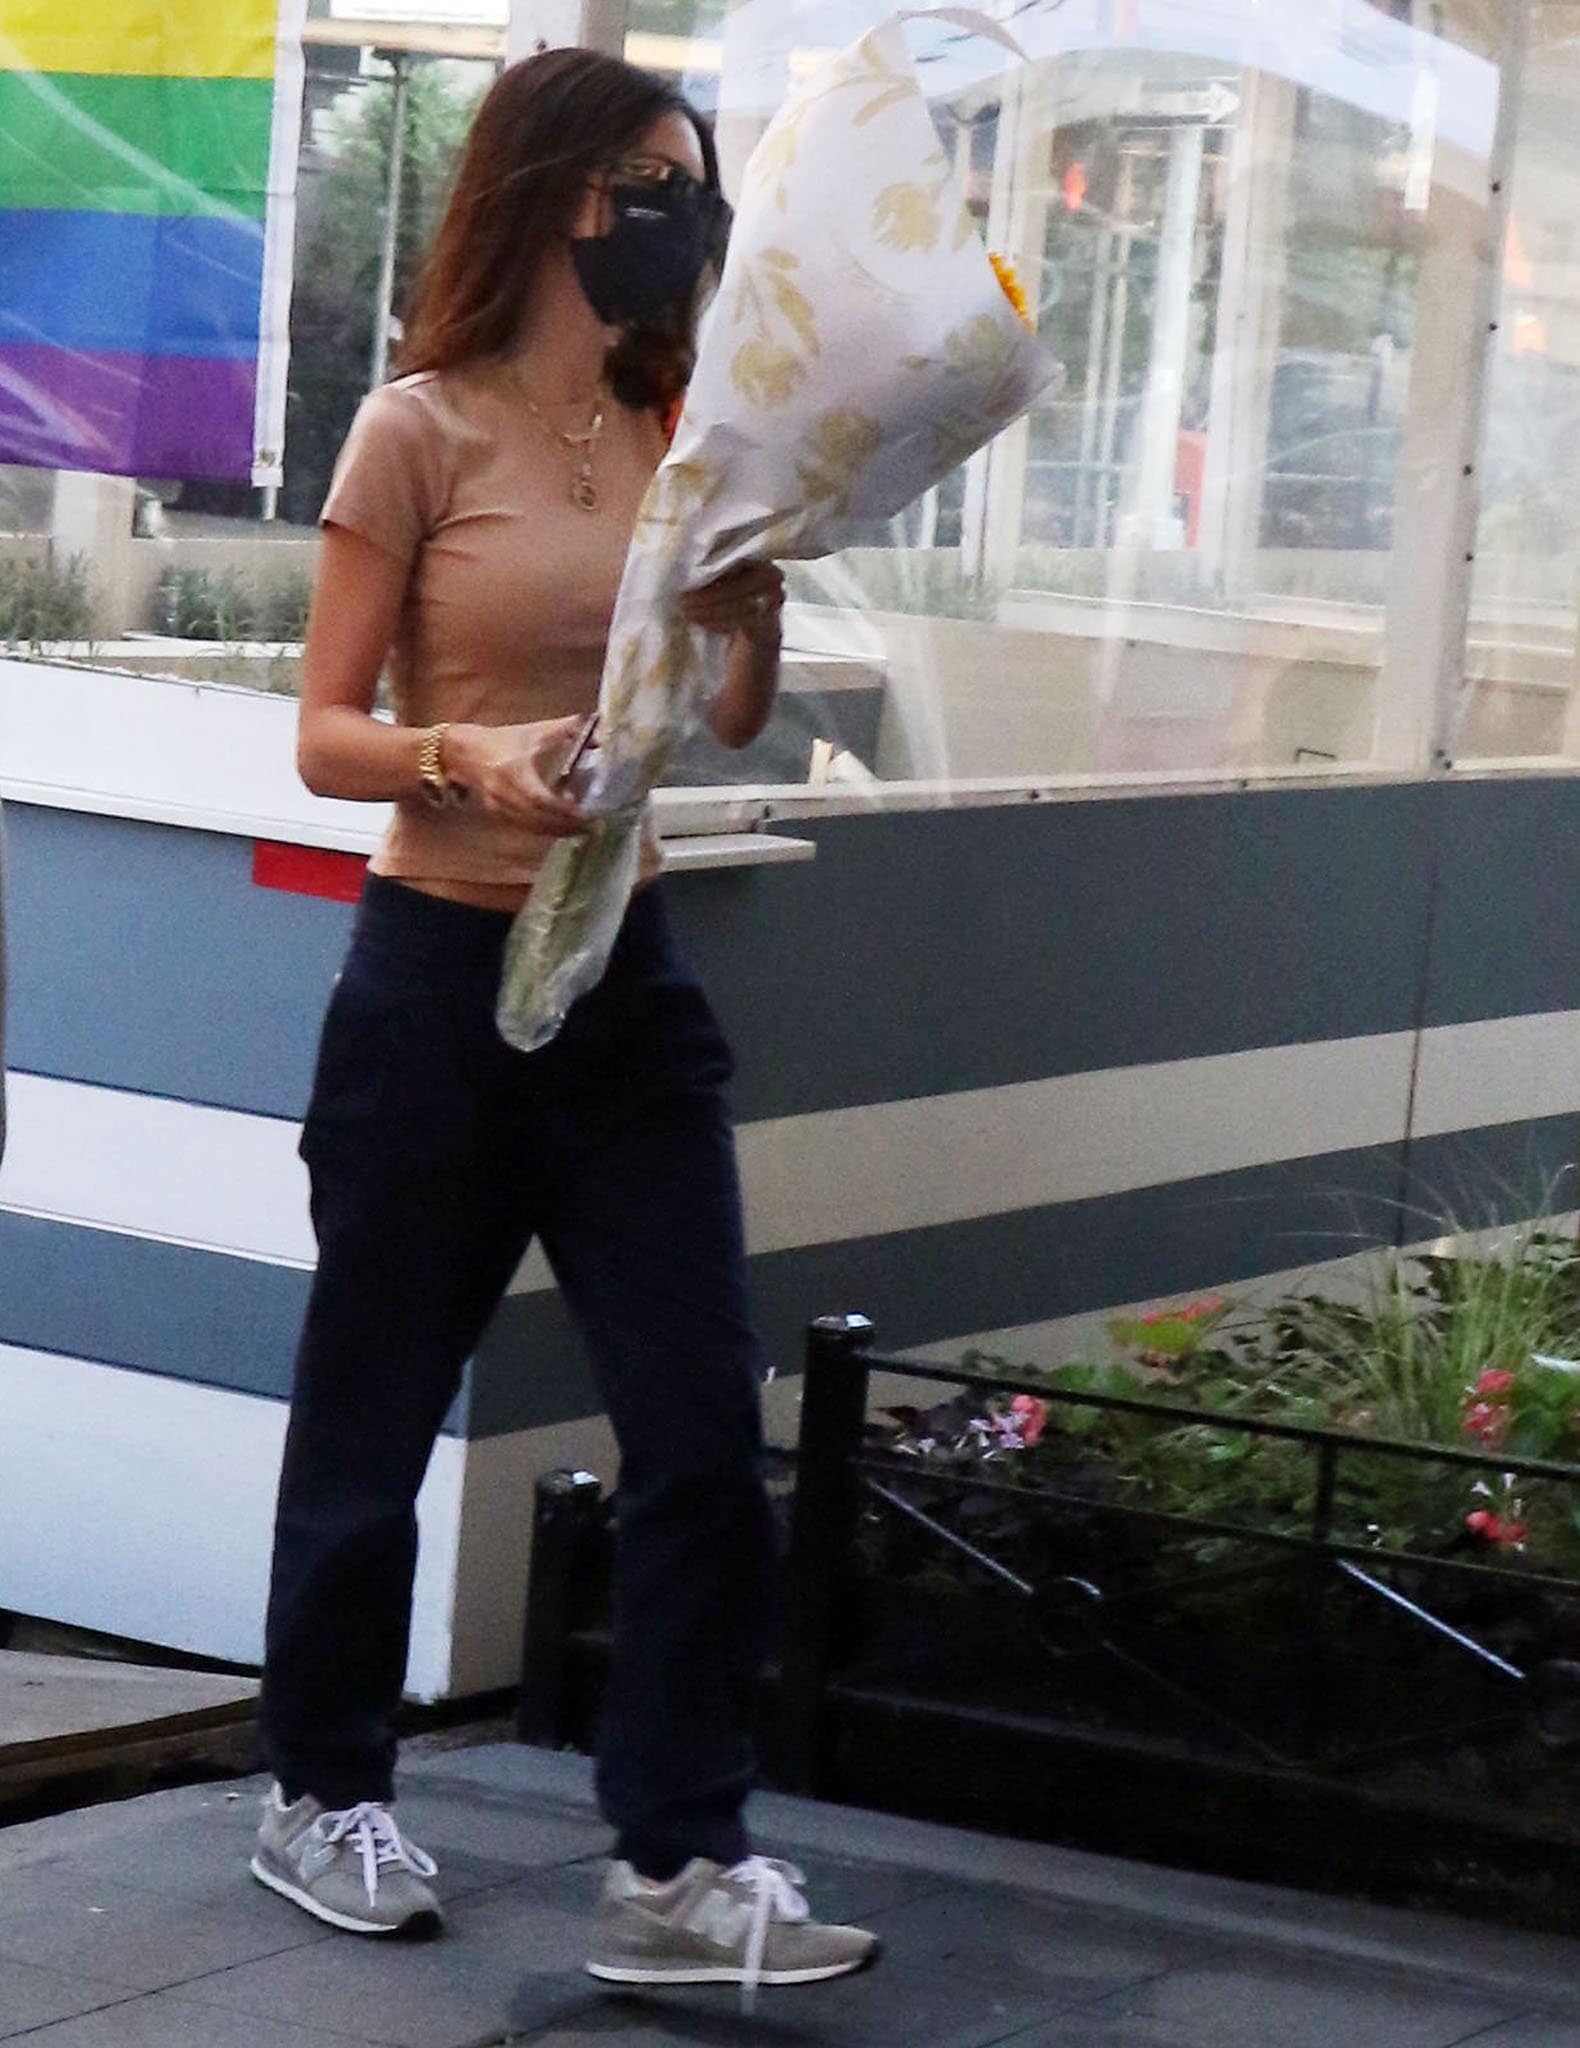 Emily Ratajkowski picking up a bouquet of flowers in Belen nude tee and navy pants in New York City on June 29, 2021